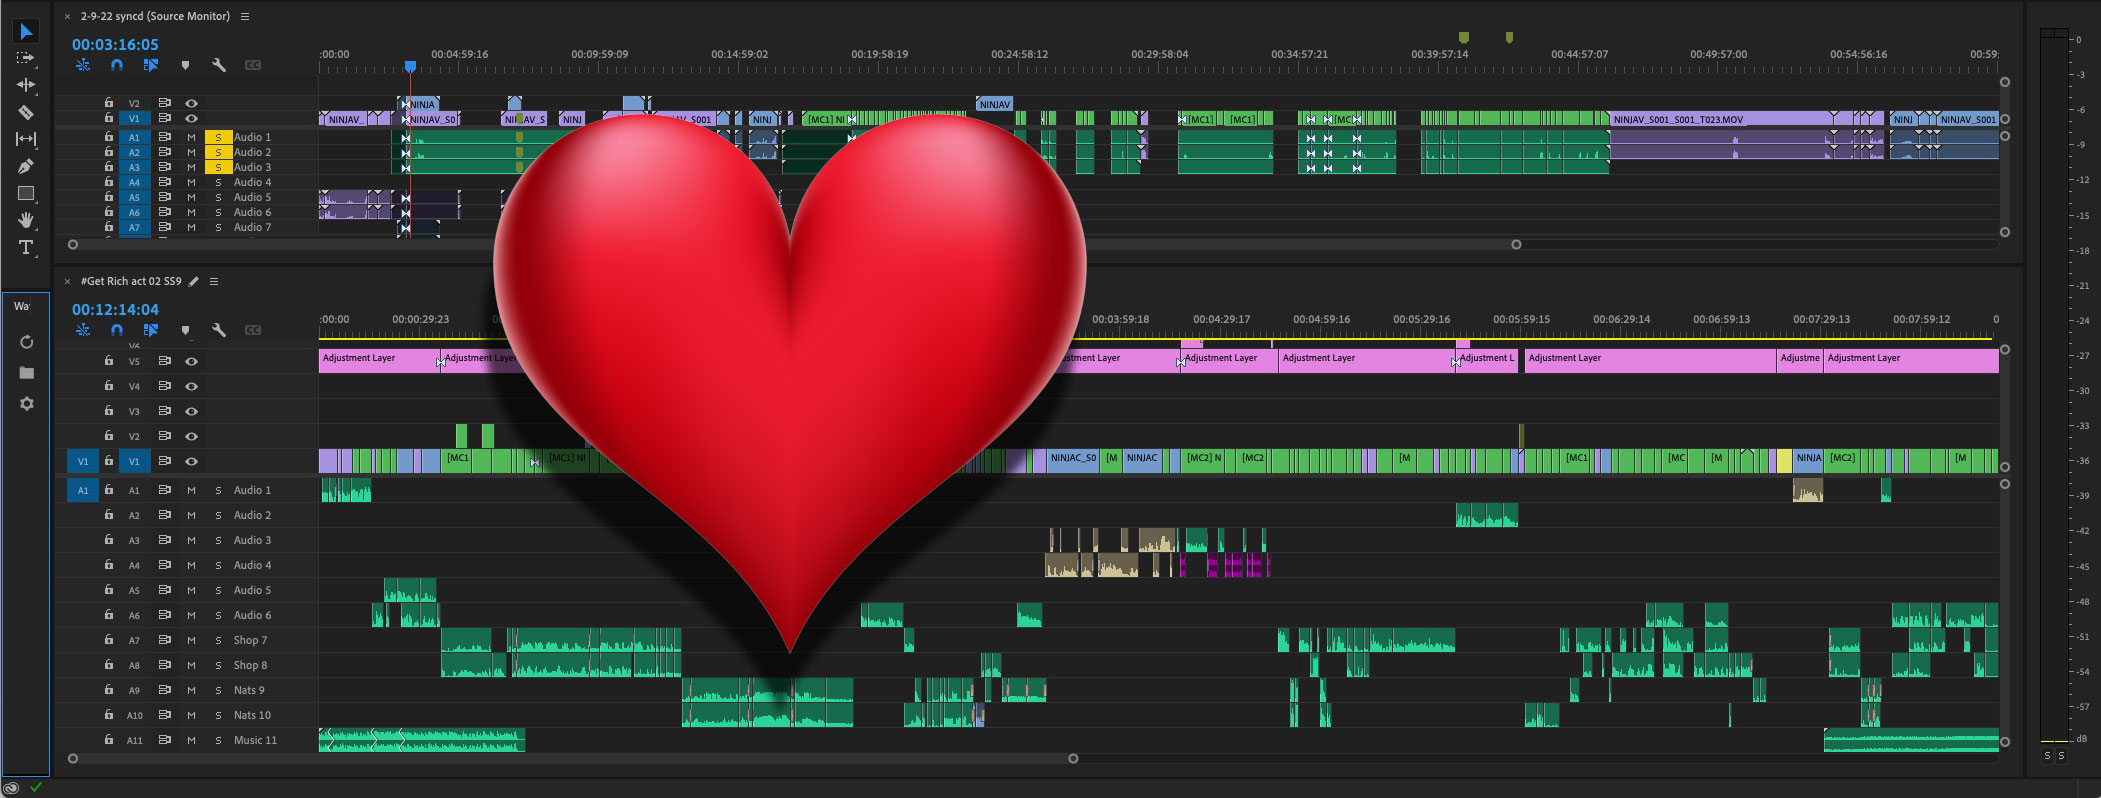 My single most loved feature in Adobe Premiere Pro 18